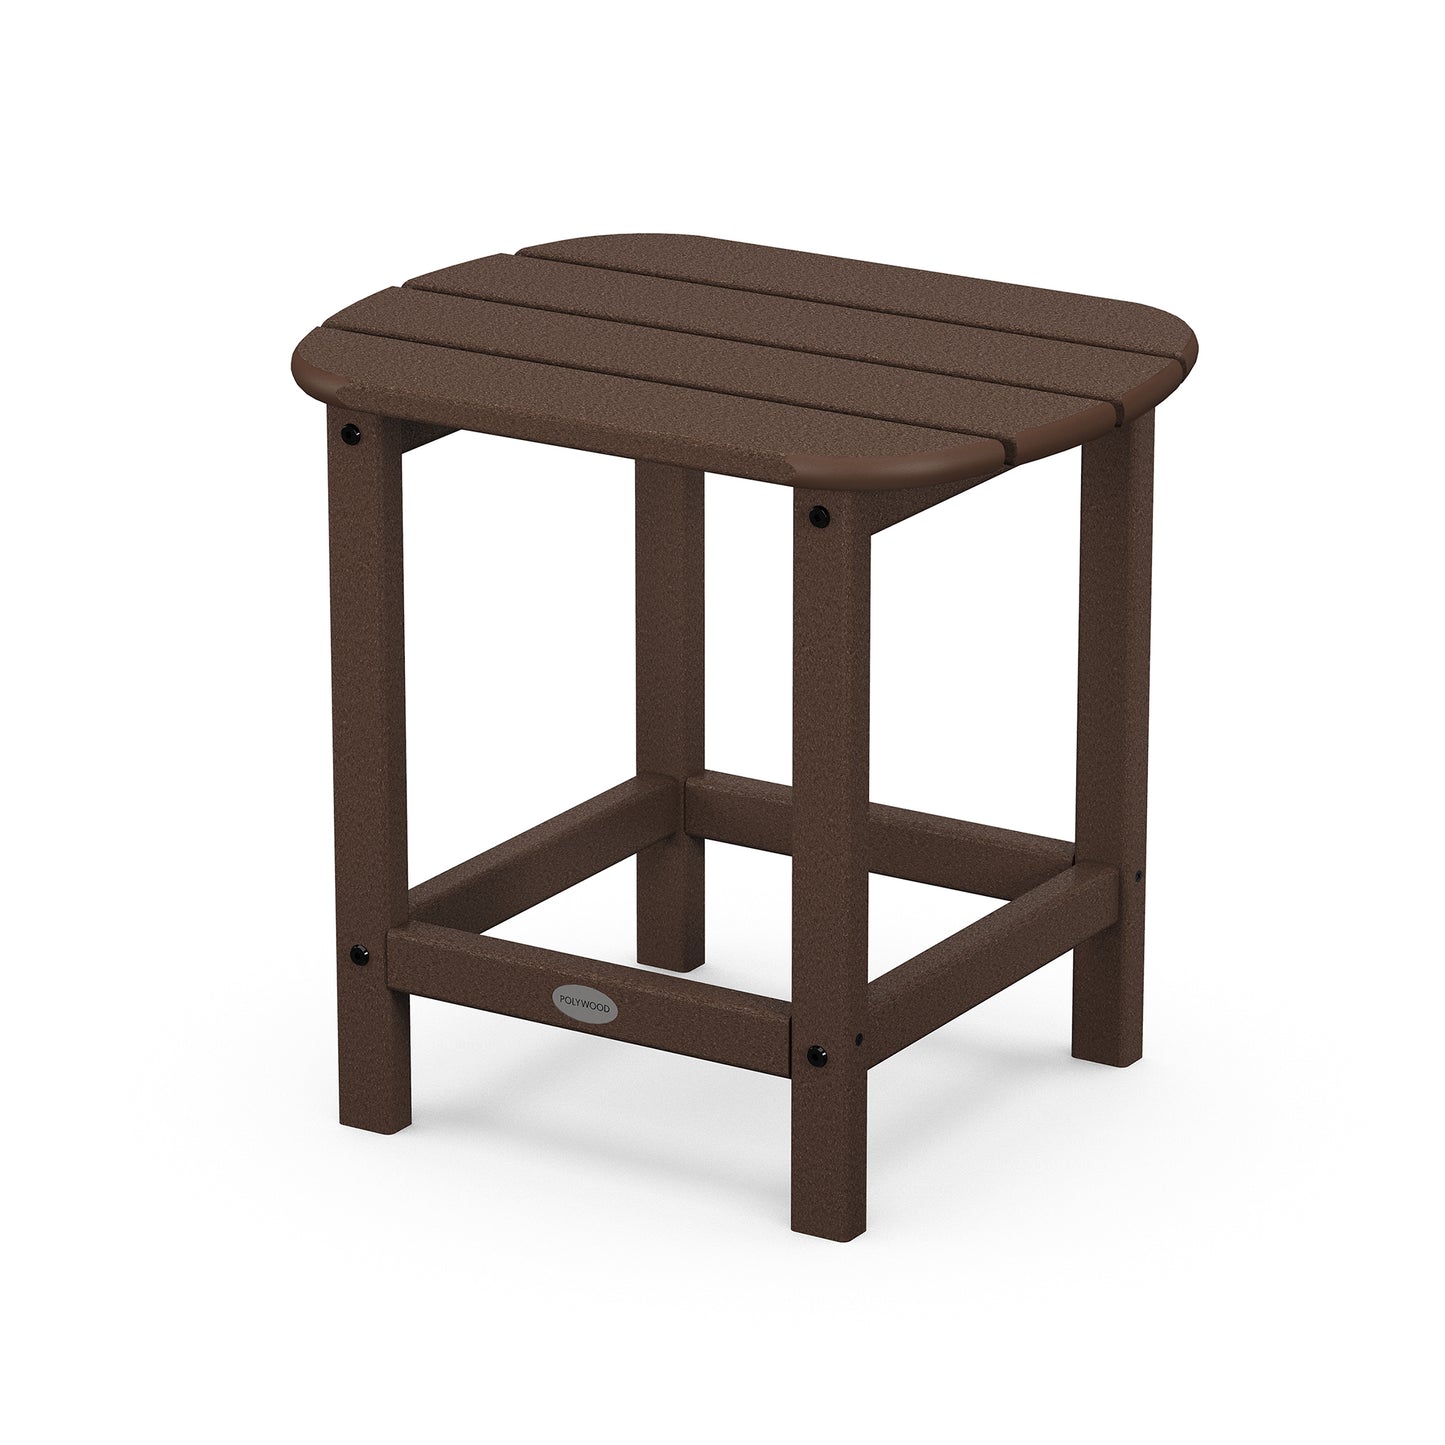 A durable brown POLYWOOD South Beach Adirondack 18" Side Table, with a slatted top and four legs, shown on a plain white background.